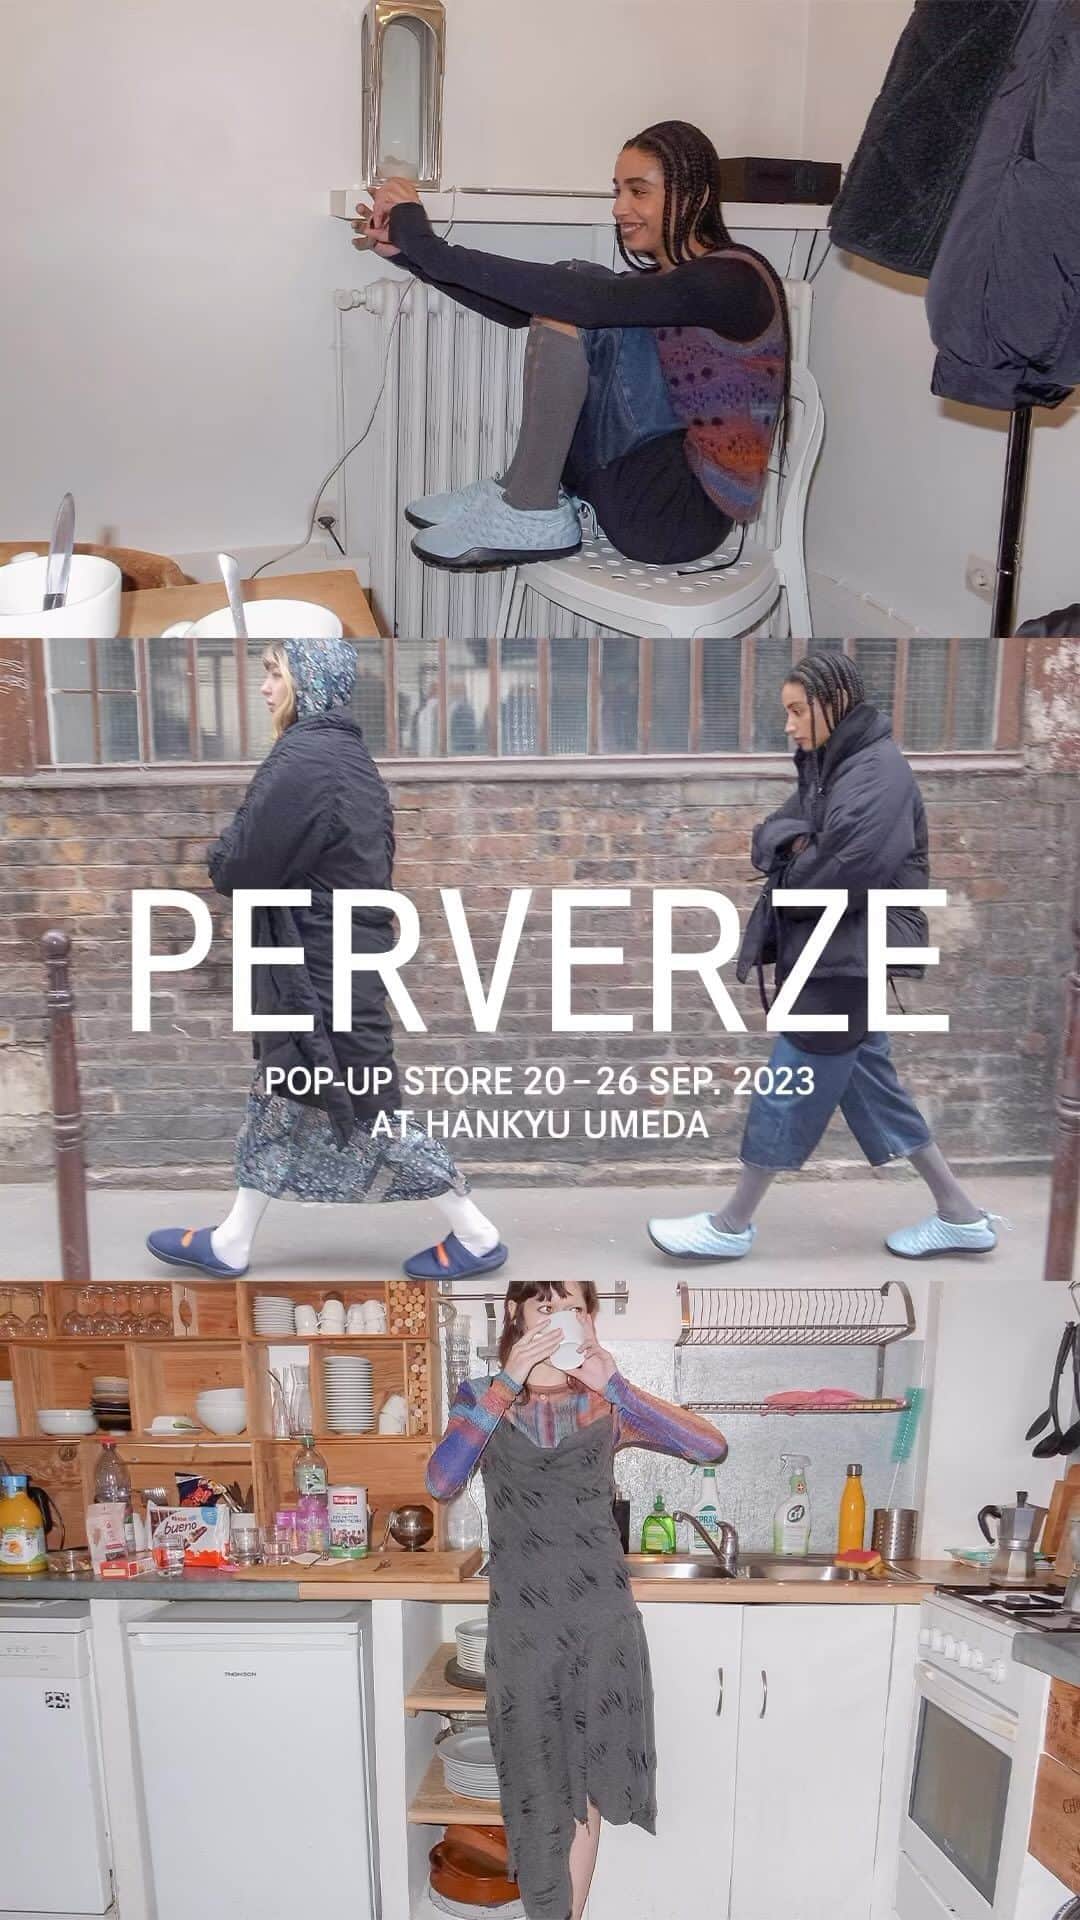 PERVERZE_OFFICIALのインスタグラム：「We are having a pop-up store from 20th Sep to 26th Sep at D-LAB HANKYU UMEDA  @hankyu_dlab . You can see and try our latest AW23 collection. We're looking forward to seeing you.  9/20(水)から9/26(火)までの期間限定で、D-LAB 阪急うめだ店にてポップアップストアを開催いたします。 AW23の最新秋冬コレクションアイテムをお試しいただけます。 是非ご覧ください。  【STORE INFORMATION】 D-LAB 阪急うめだ本店 ADDRESS: 大阪府大阪市北区角田町8-7 阪急うめだ本店3F TEL: 06-6361-1381 TIME: 10:00～20:00  #PERVERZE #AW23」